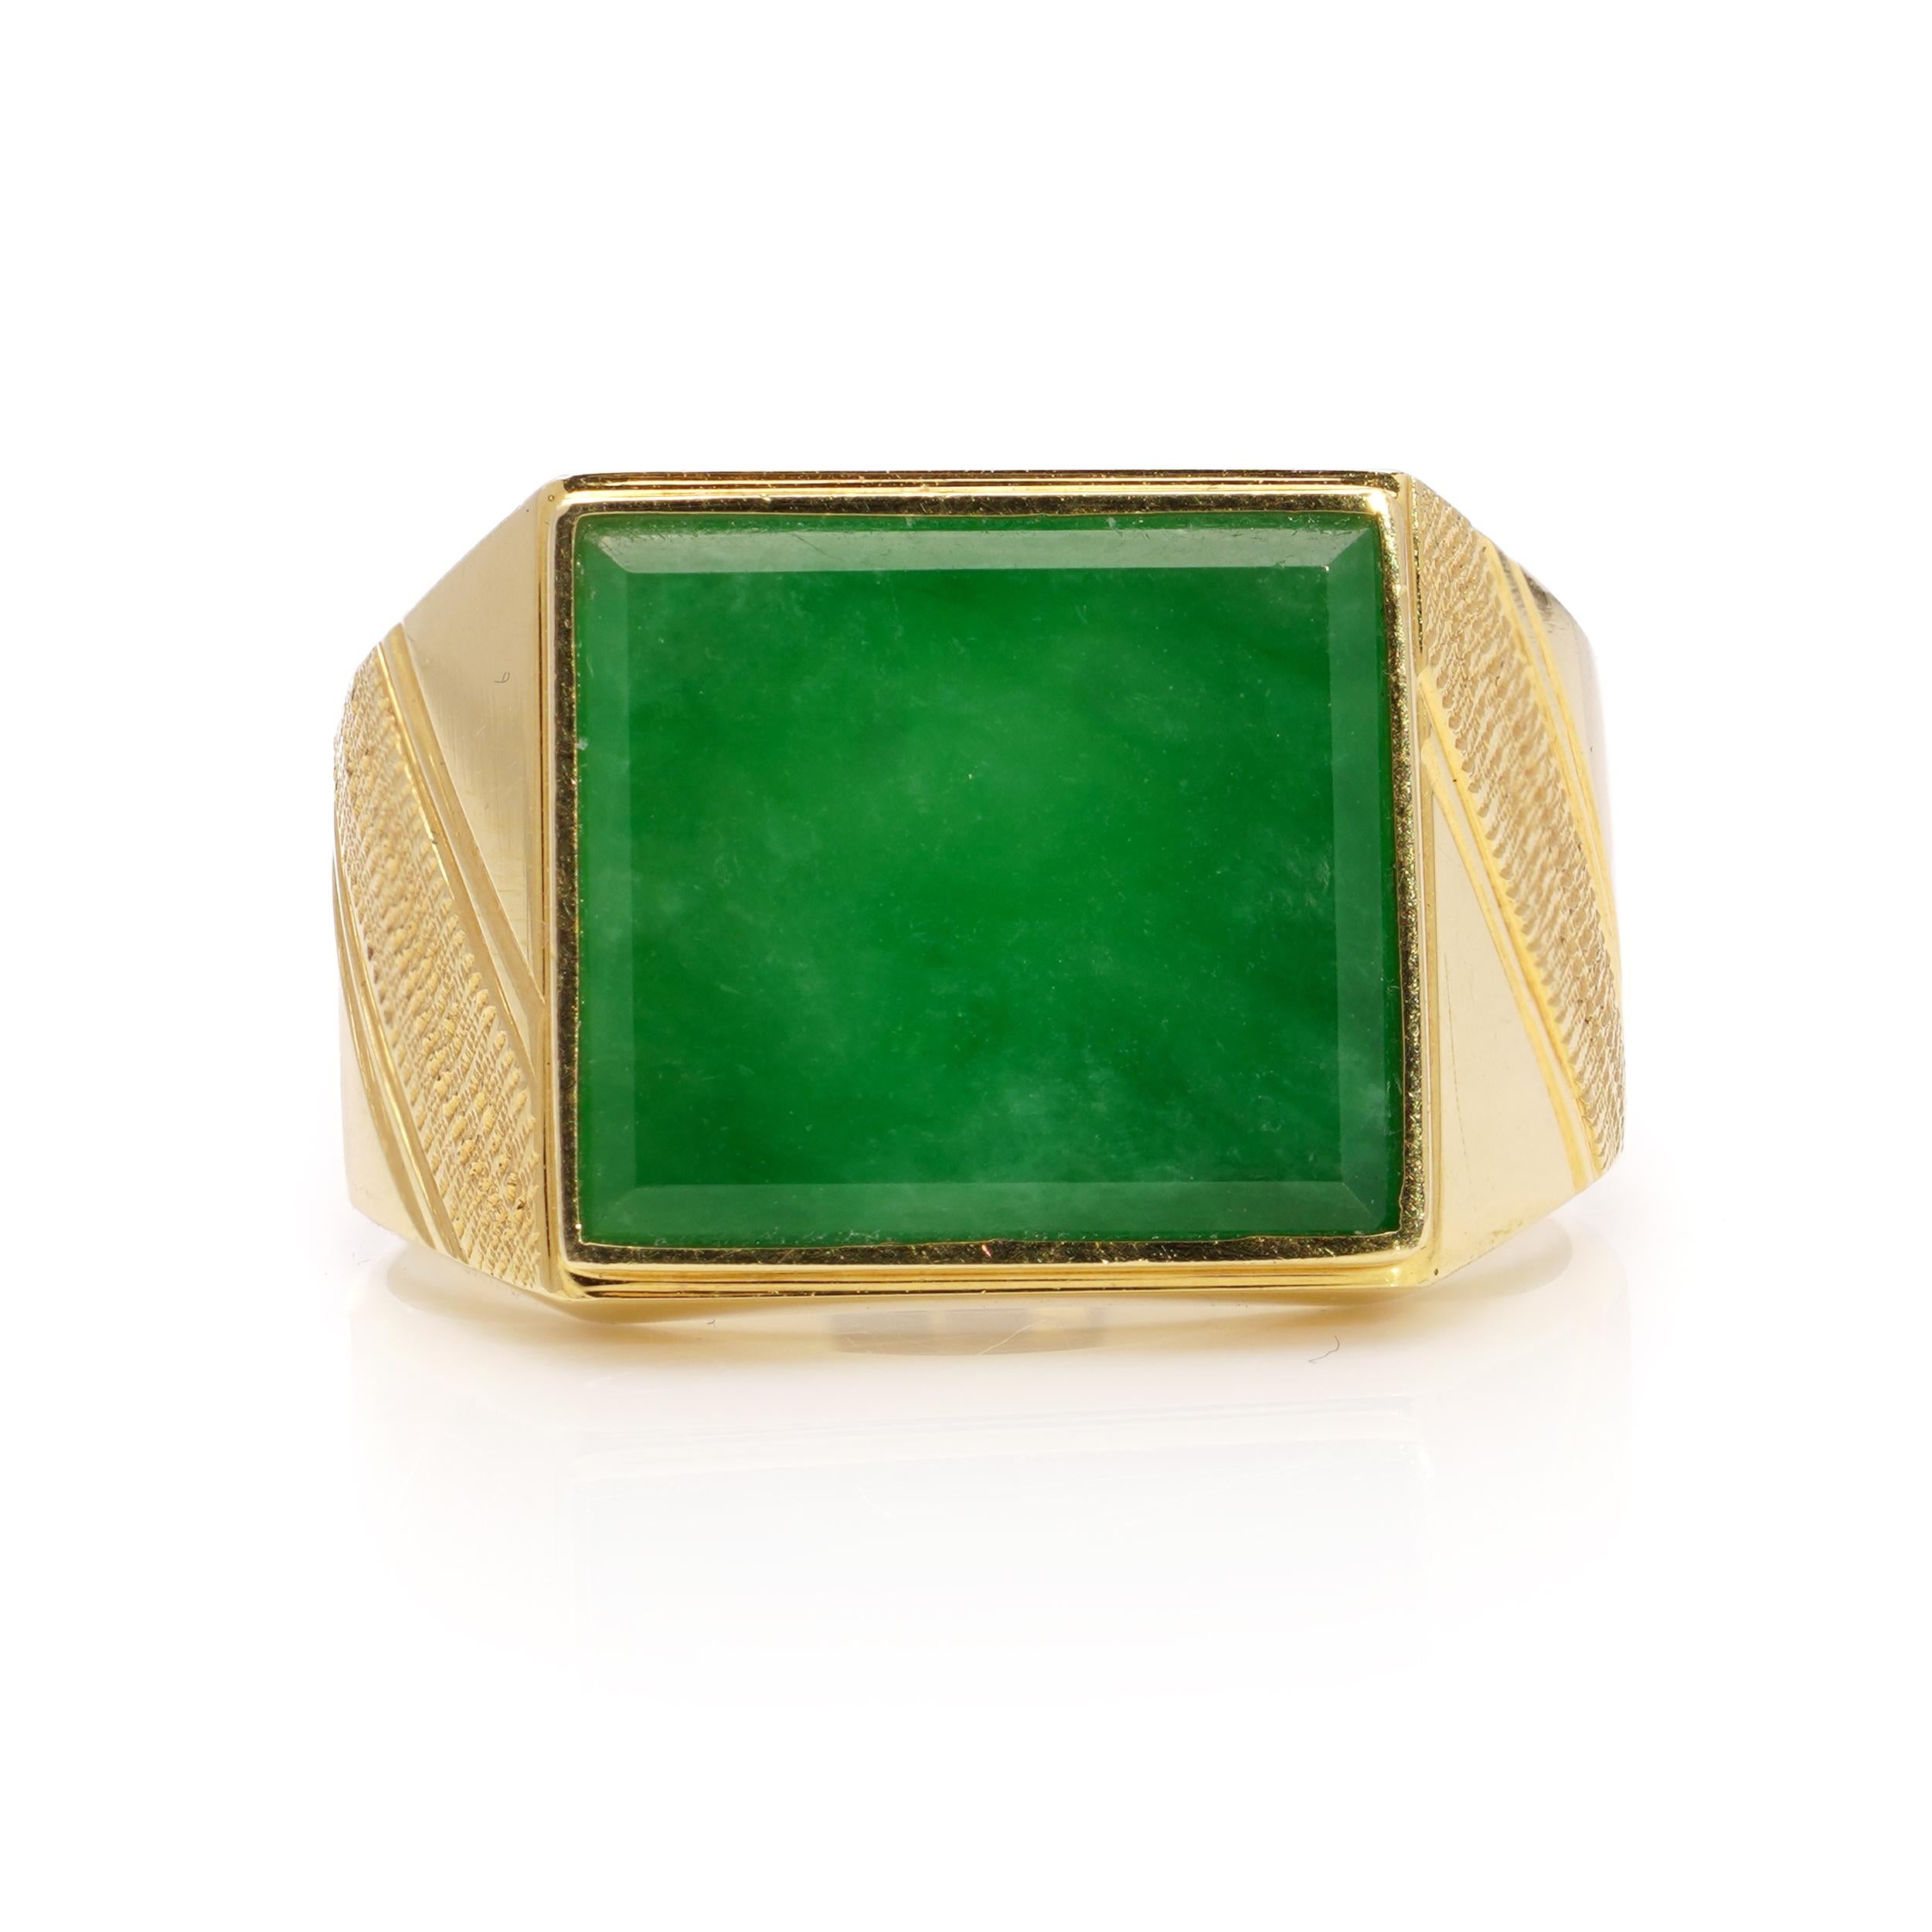 Vintage Chinese 18kt. yellow gold square-shaped jade men's ring. 
Hallmarked with 18kt gold mark, CN ( stands For China ) 

Dimensions:
Finger Size (UK) = T (US) = 10  (EU) = 61 
Length x width x height: 2.7 x 2.2 x 1.4 cm 
Weight: 10.3 grams

Jade